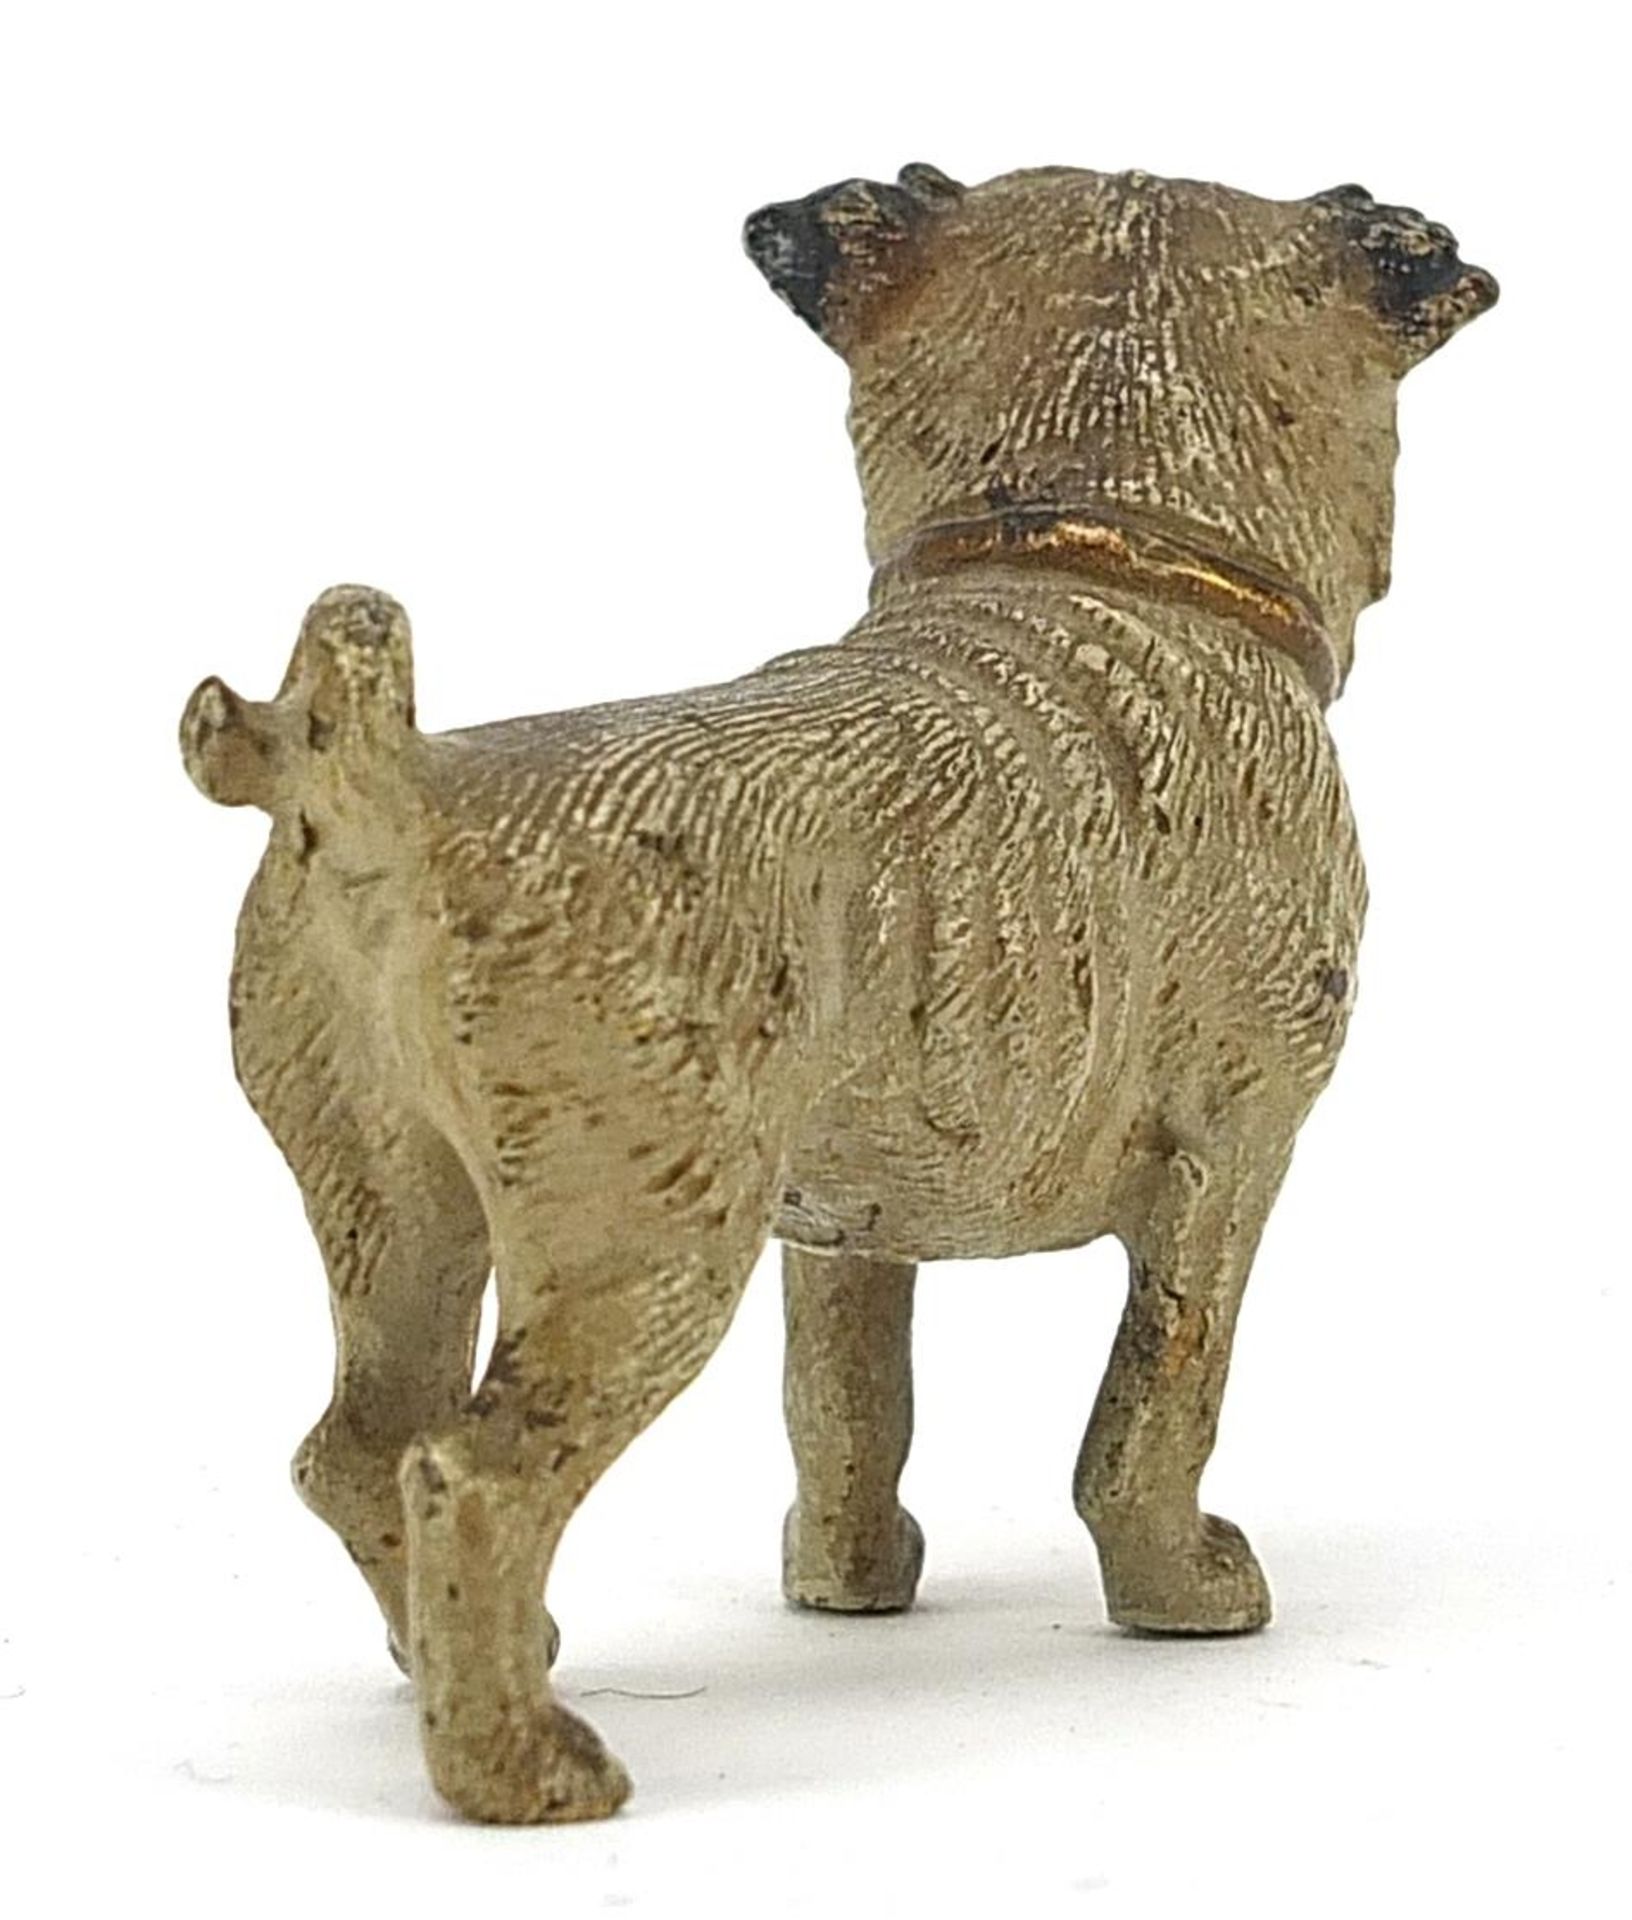 Cold painted bronze Pug dog, 5cm in length - Image 2 of 3